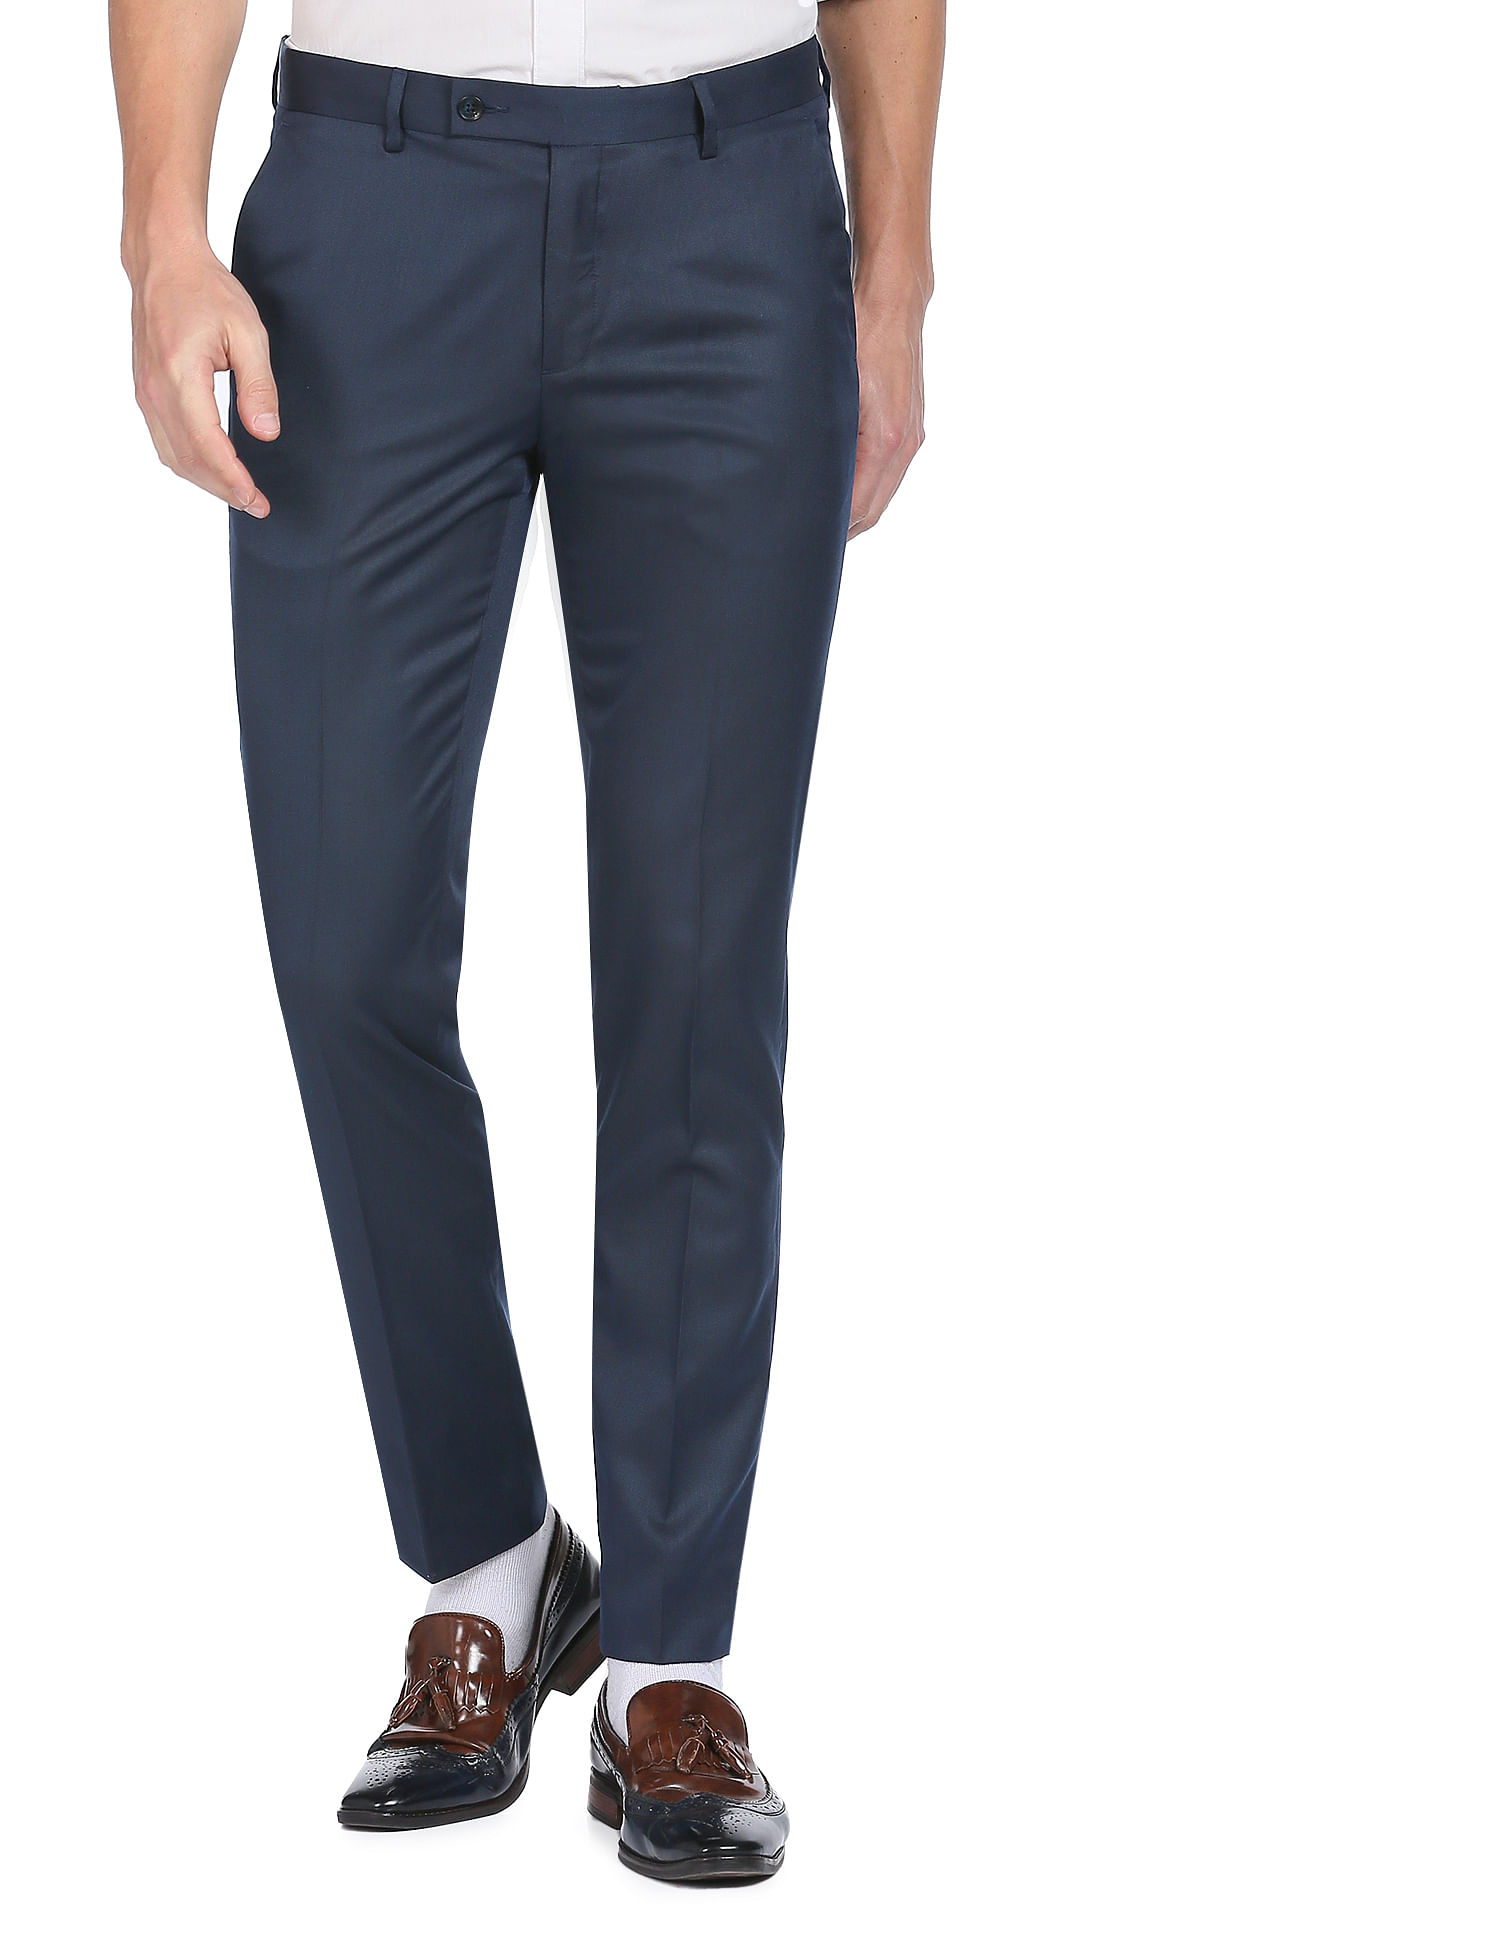 Buy Cliths Blue Slim Fit Flat Front Formal Pants for Men, Official Trouser  Pant (30) at Amazon.in